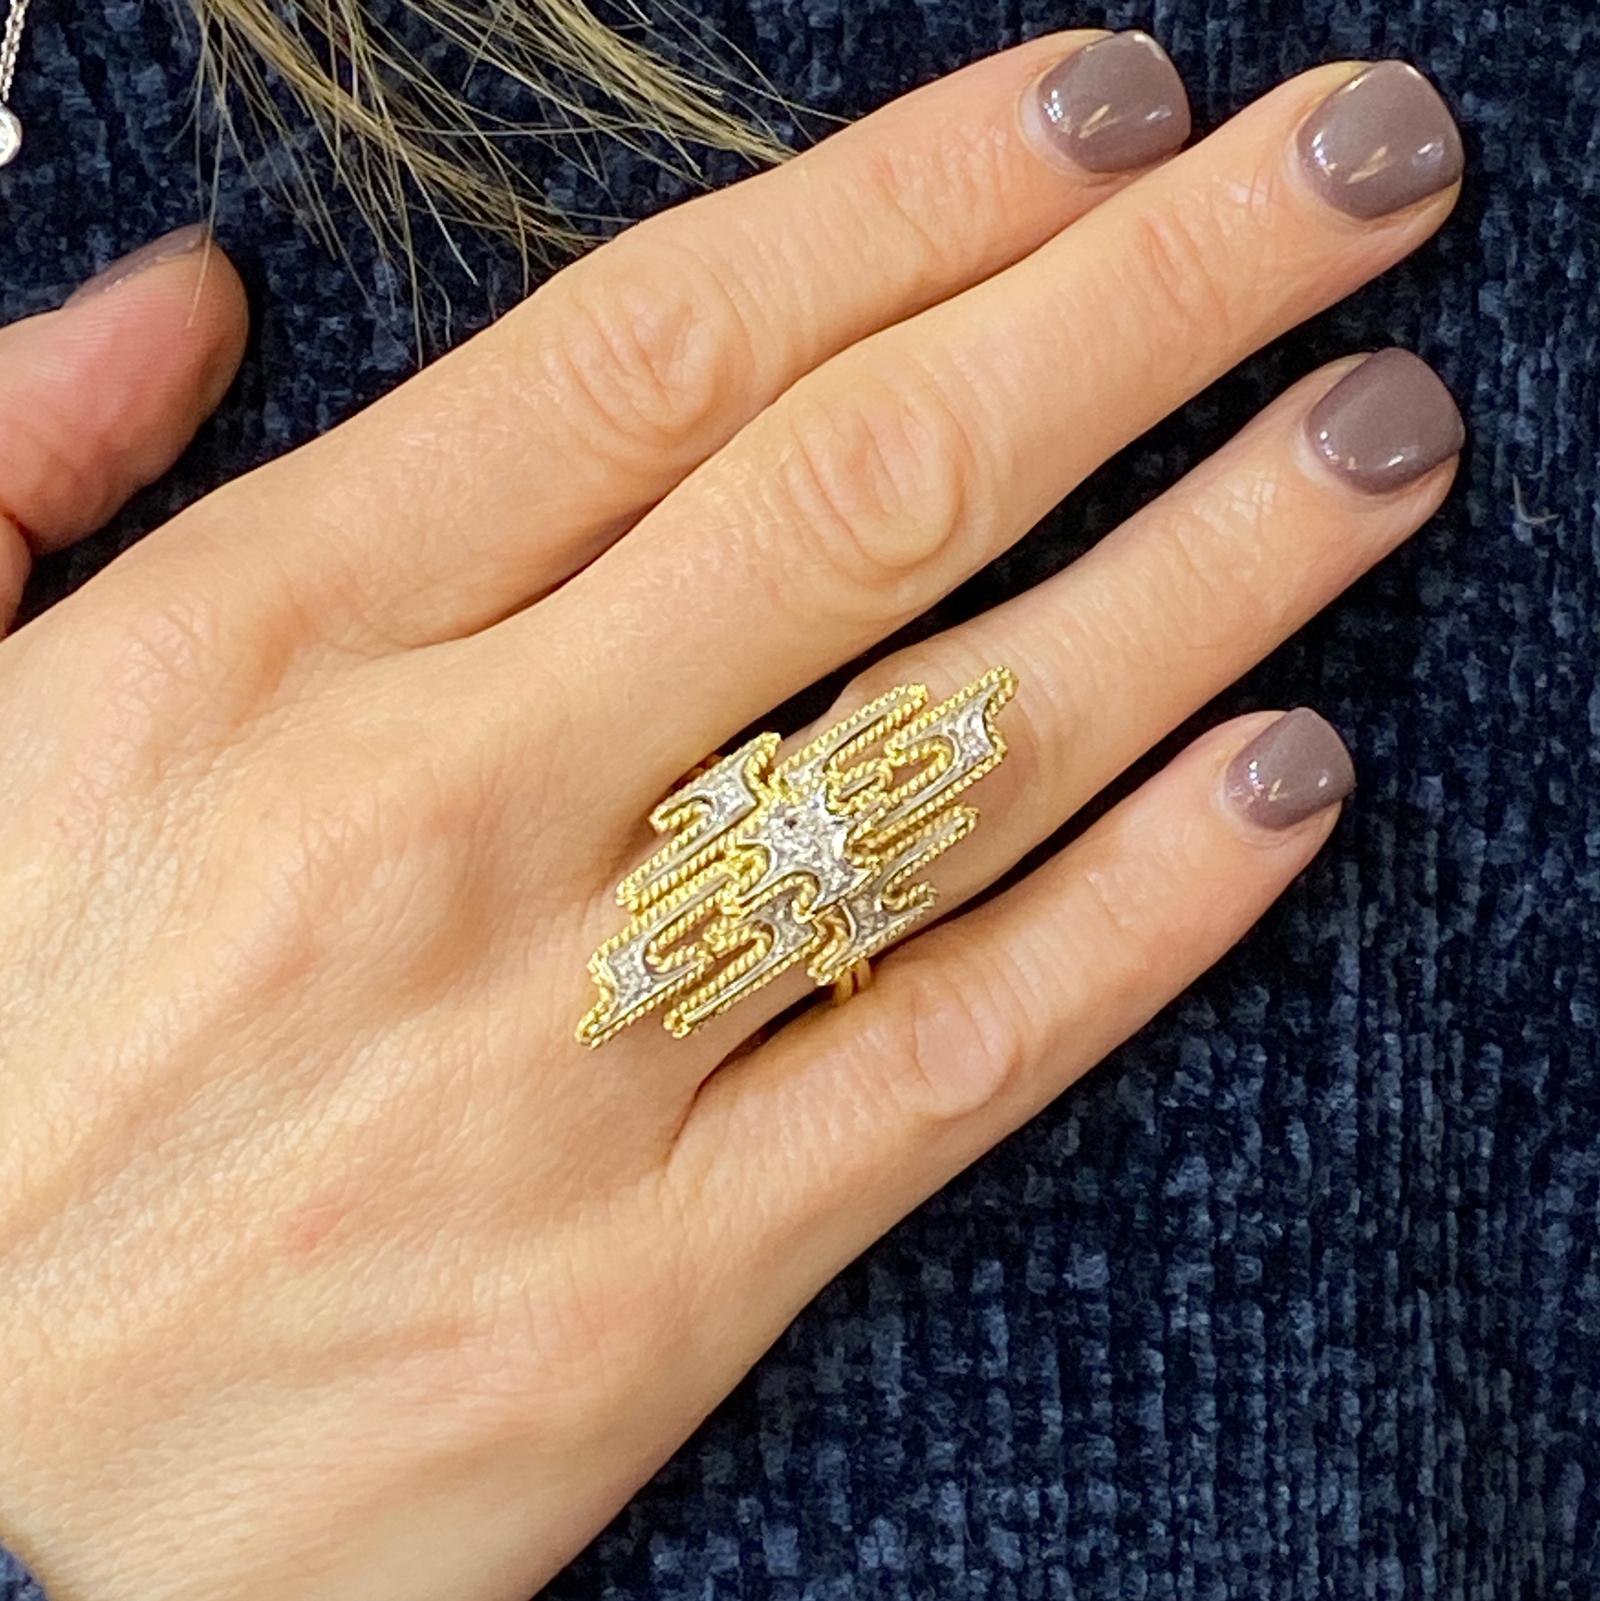 Fabulous 1970's diamond ring fashioned in 18 karat white and yellow gold. The ring features 19 round brilliant cut diamonds weighing .19 carat total weight and graded G-H color and SI clarity. The elongated ring measures 1.6 inches in length, .70